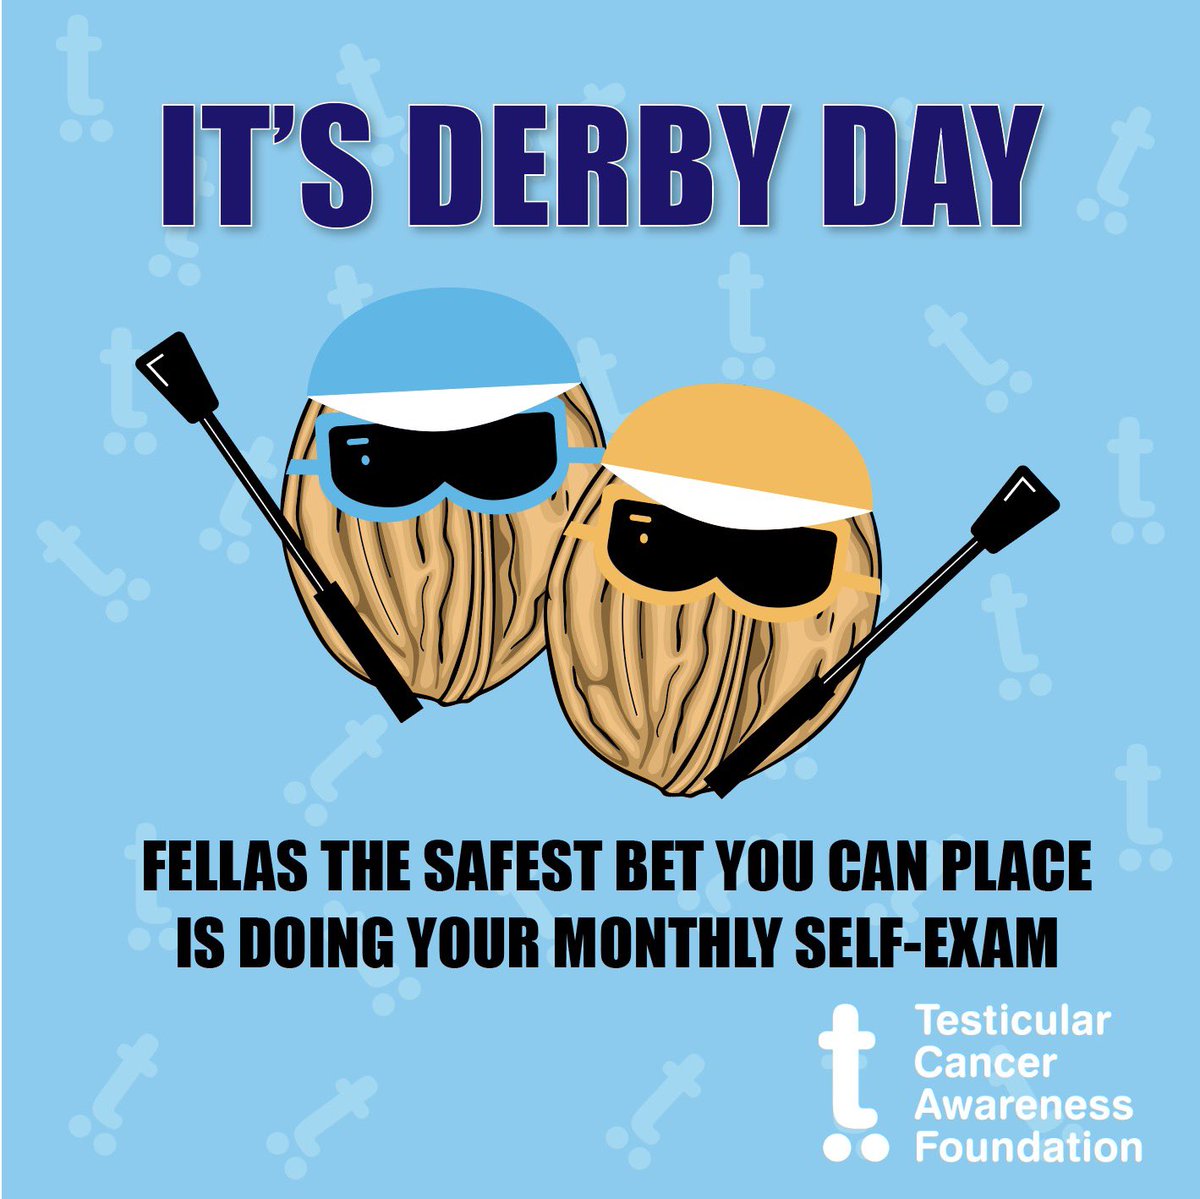 Kentucky Derby and a reminder to check your nuts! #testicularcancer #KentuckyDerby #urology